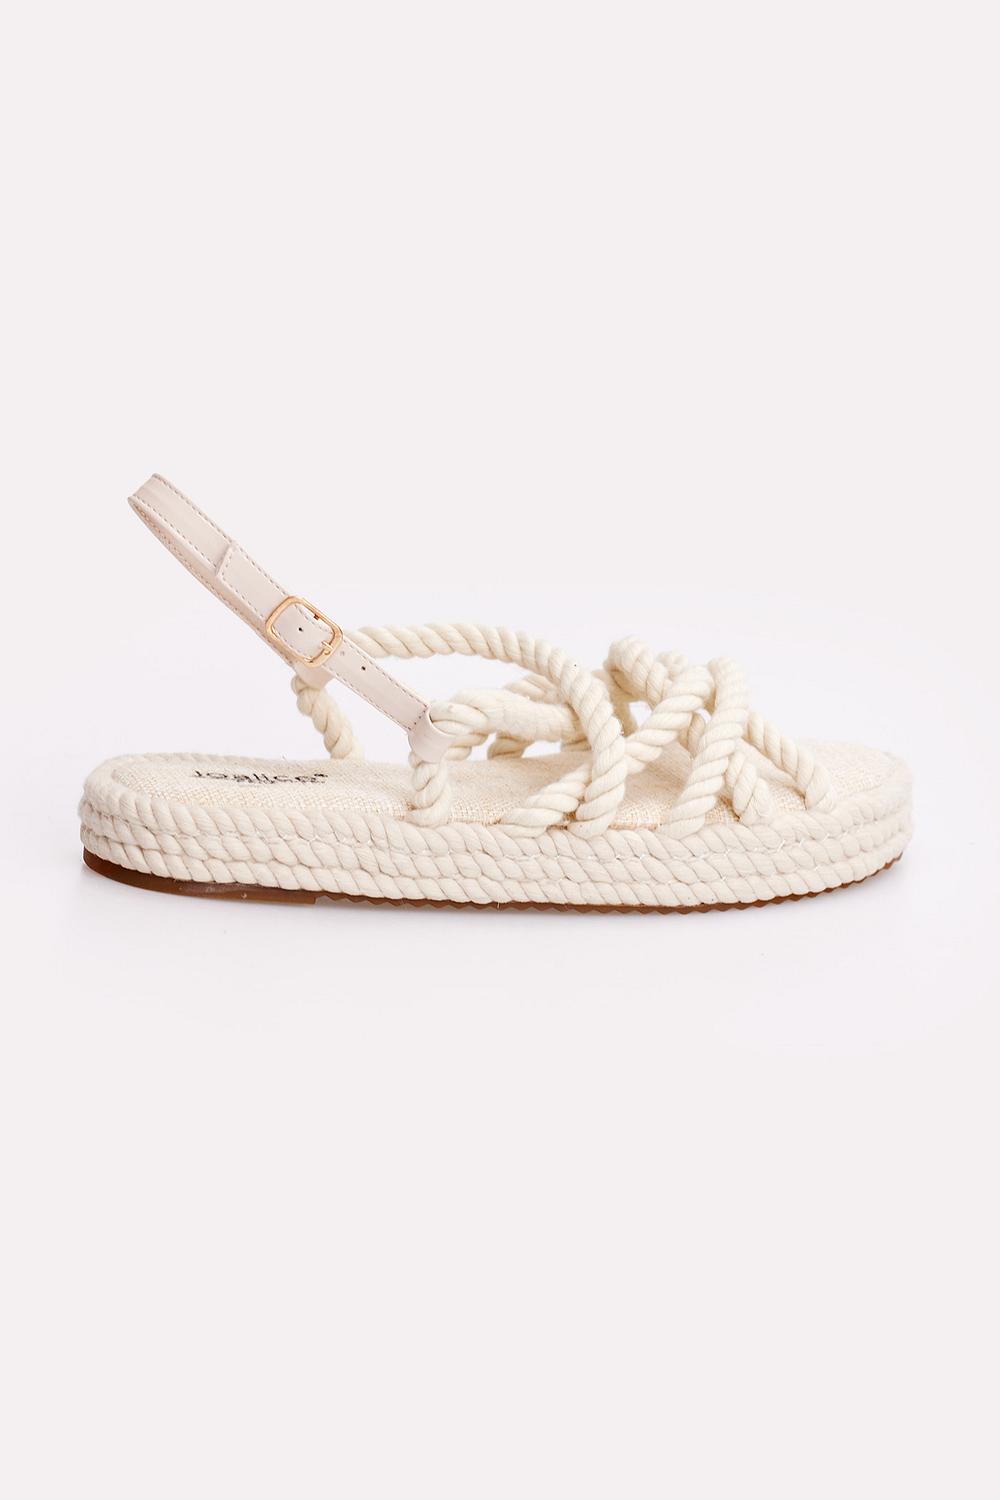 Offwhite sandals